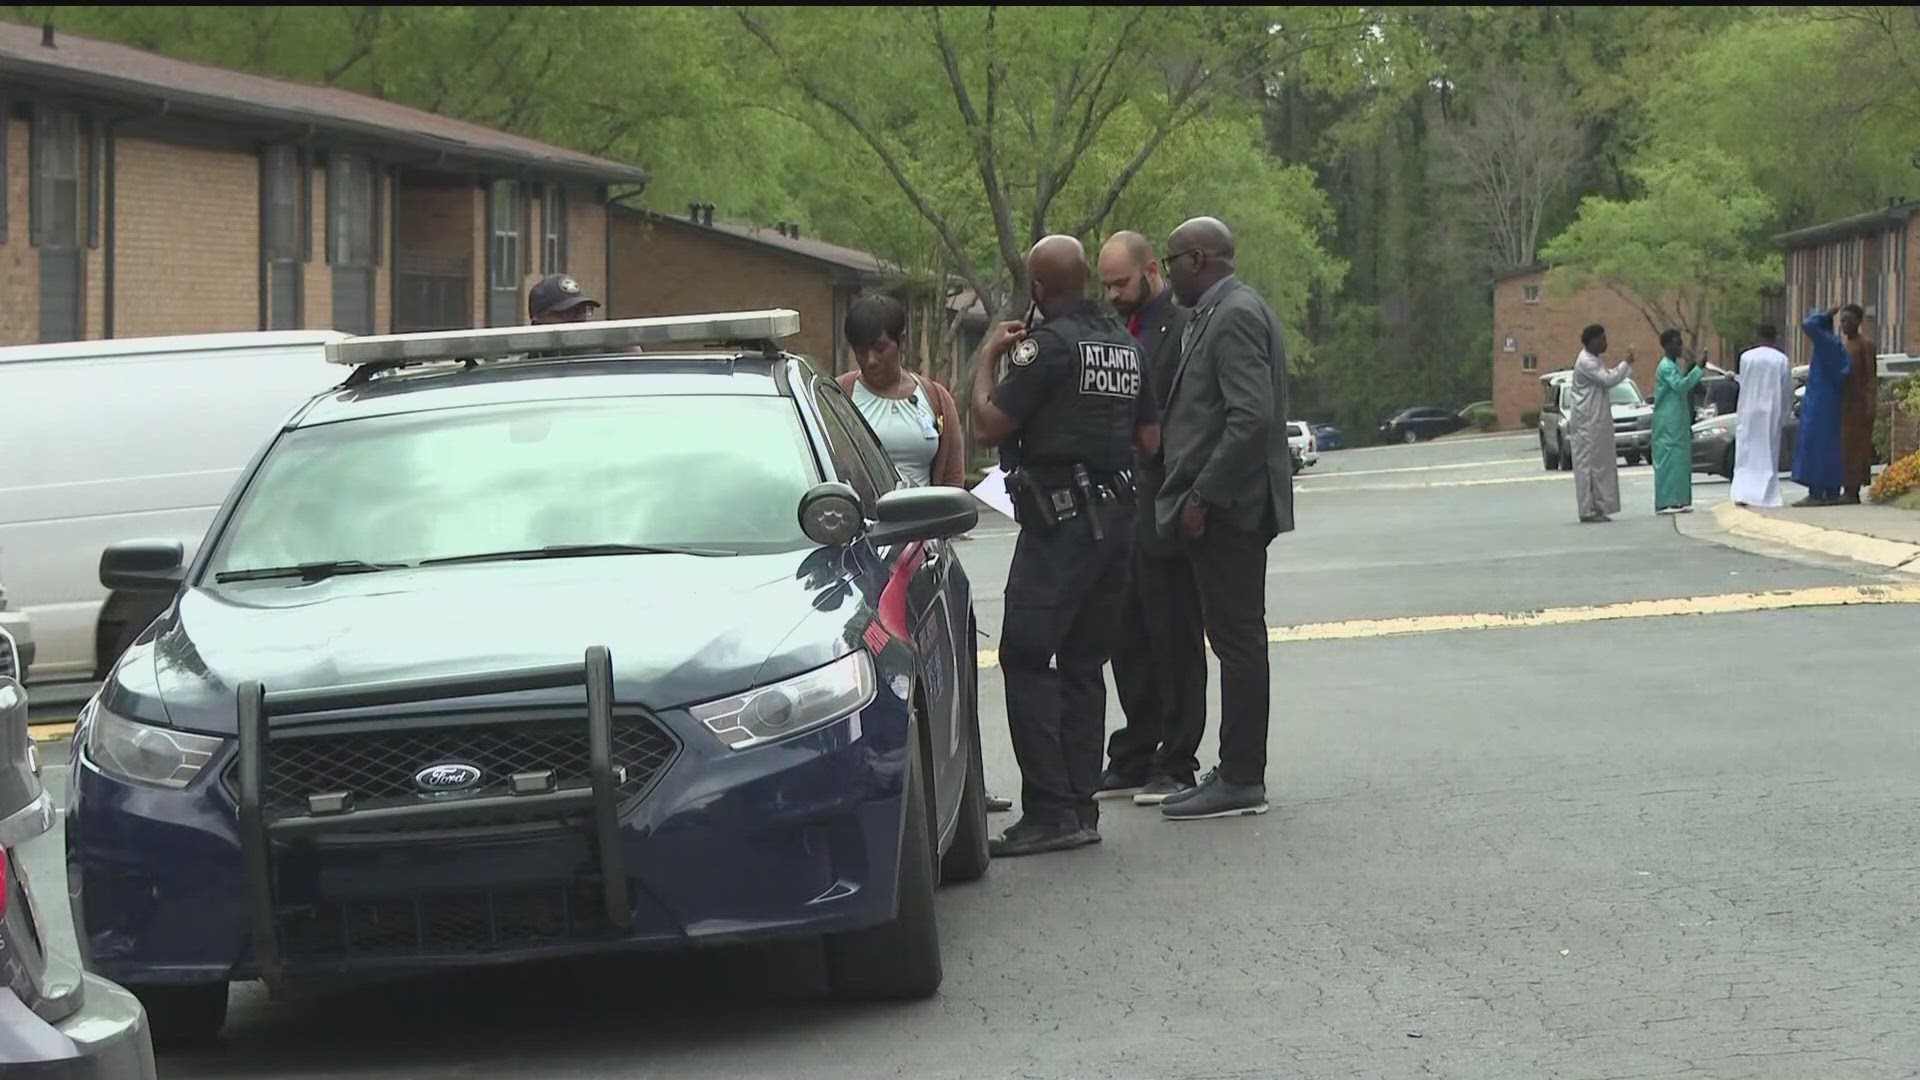 Atlanta Police said officers responded shortly after 1:15 p.m. at the Reserve At Birch Creek Apartments.